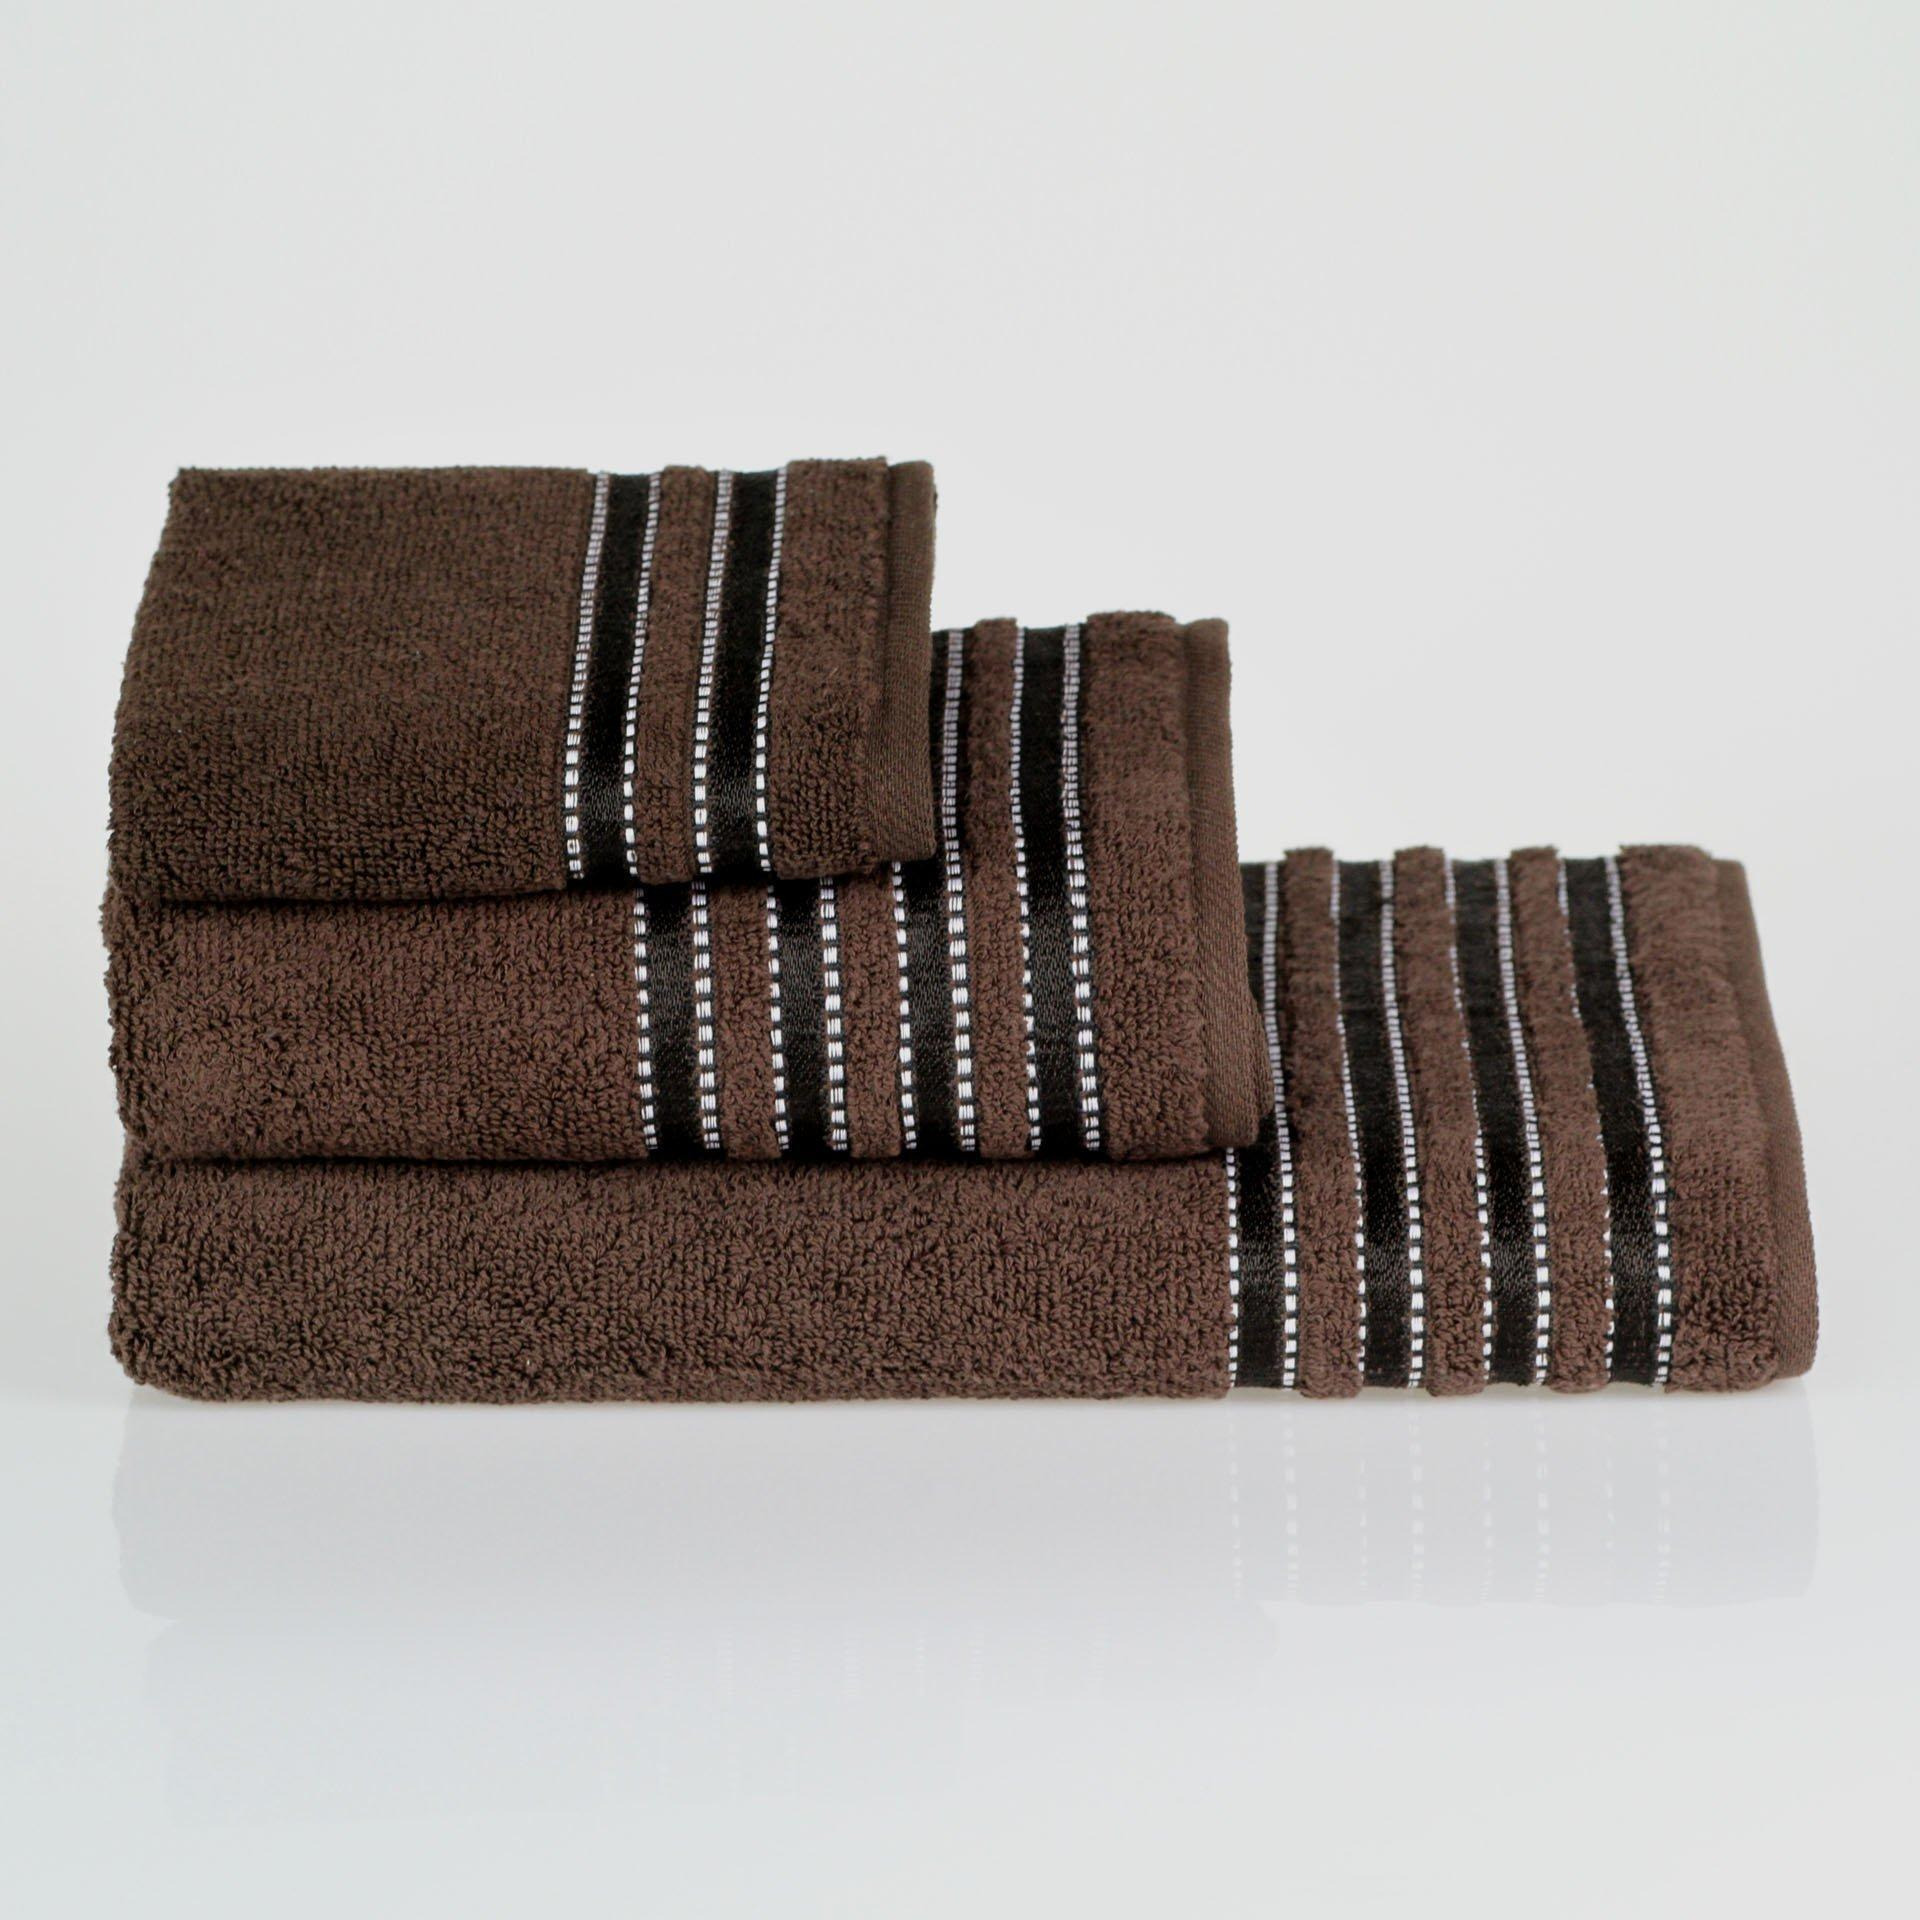 Porto Luxury 100% Cotton 500 GSM Face Cloth, Hand and Bath Towel Set - Ultra Soft and Absorbent - image 1